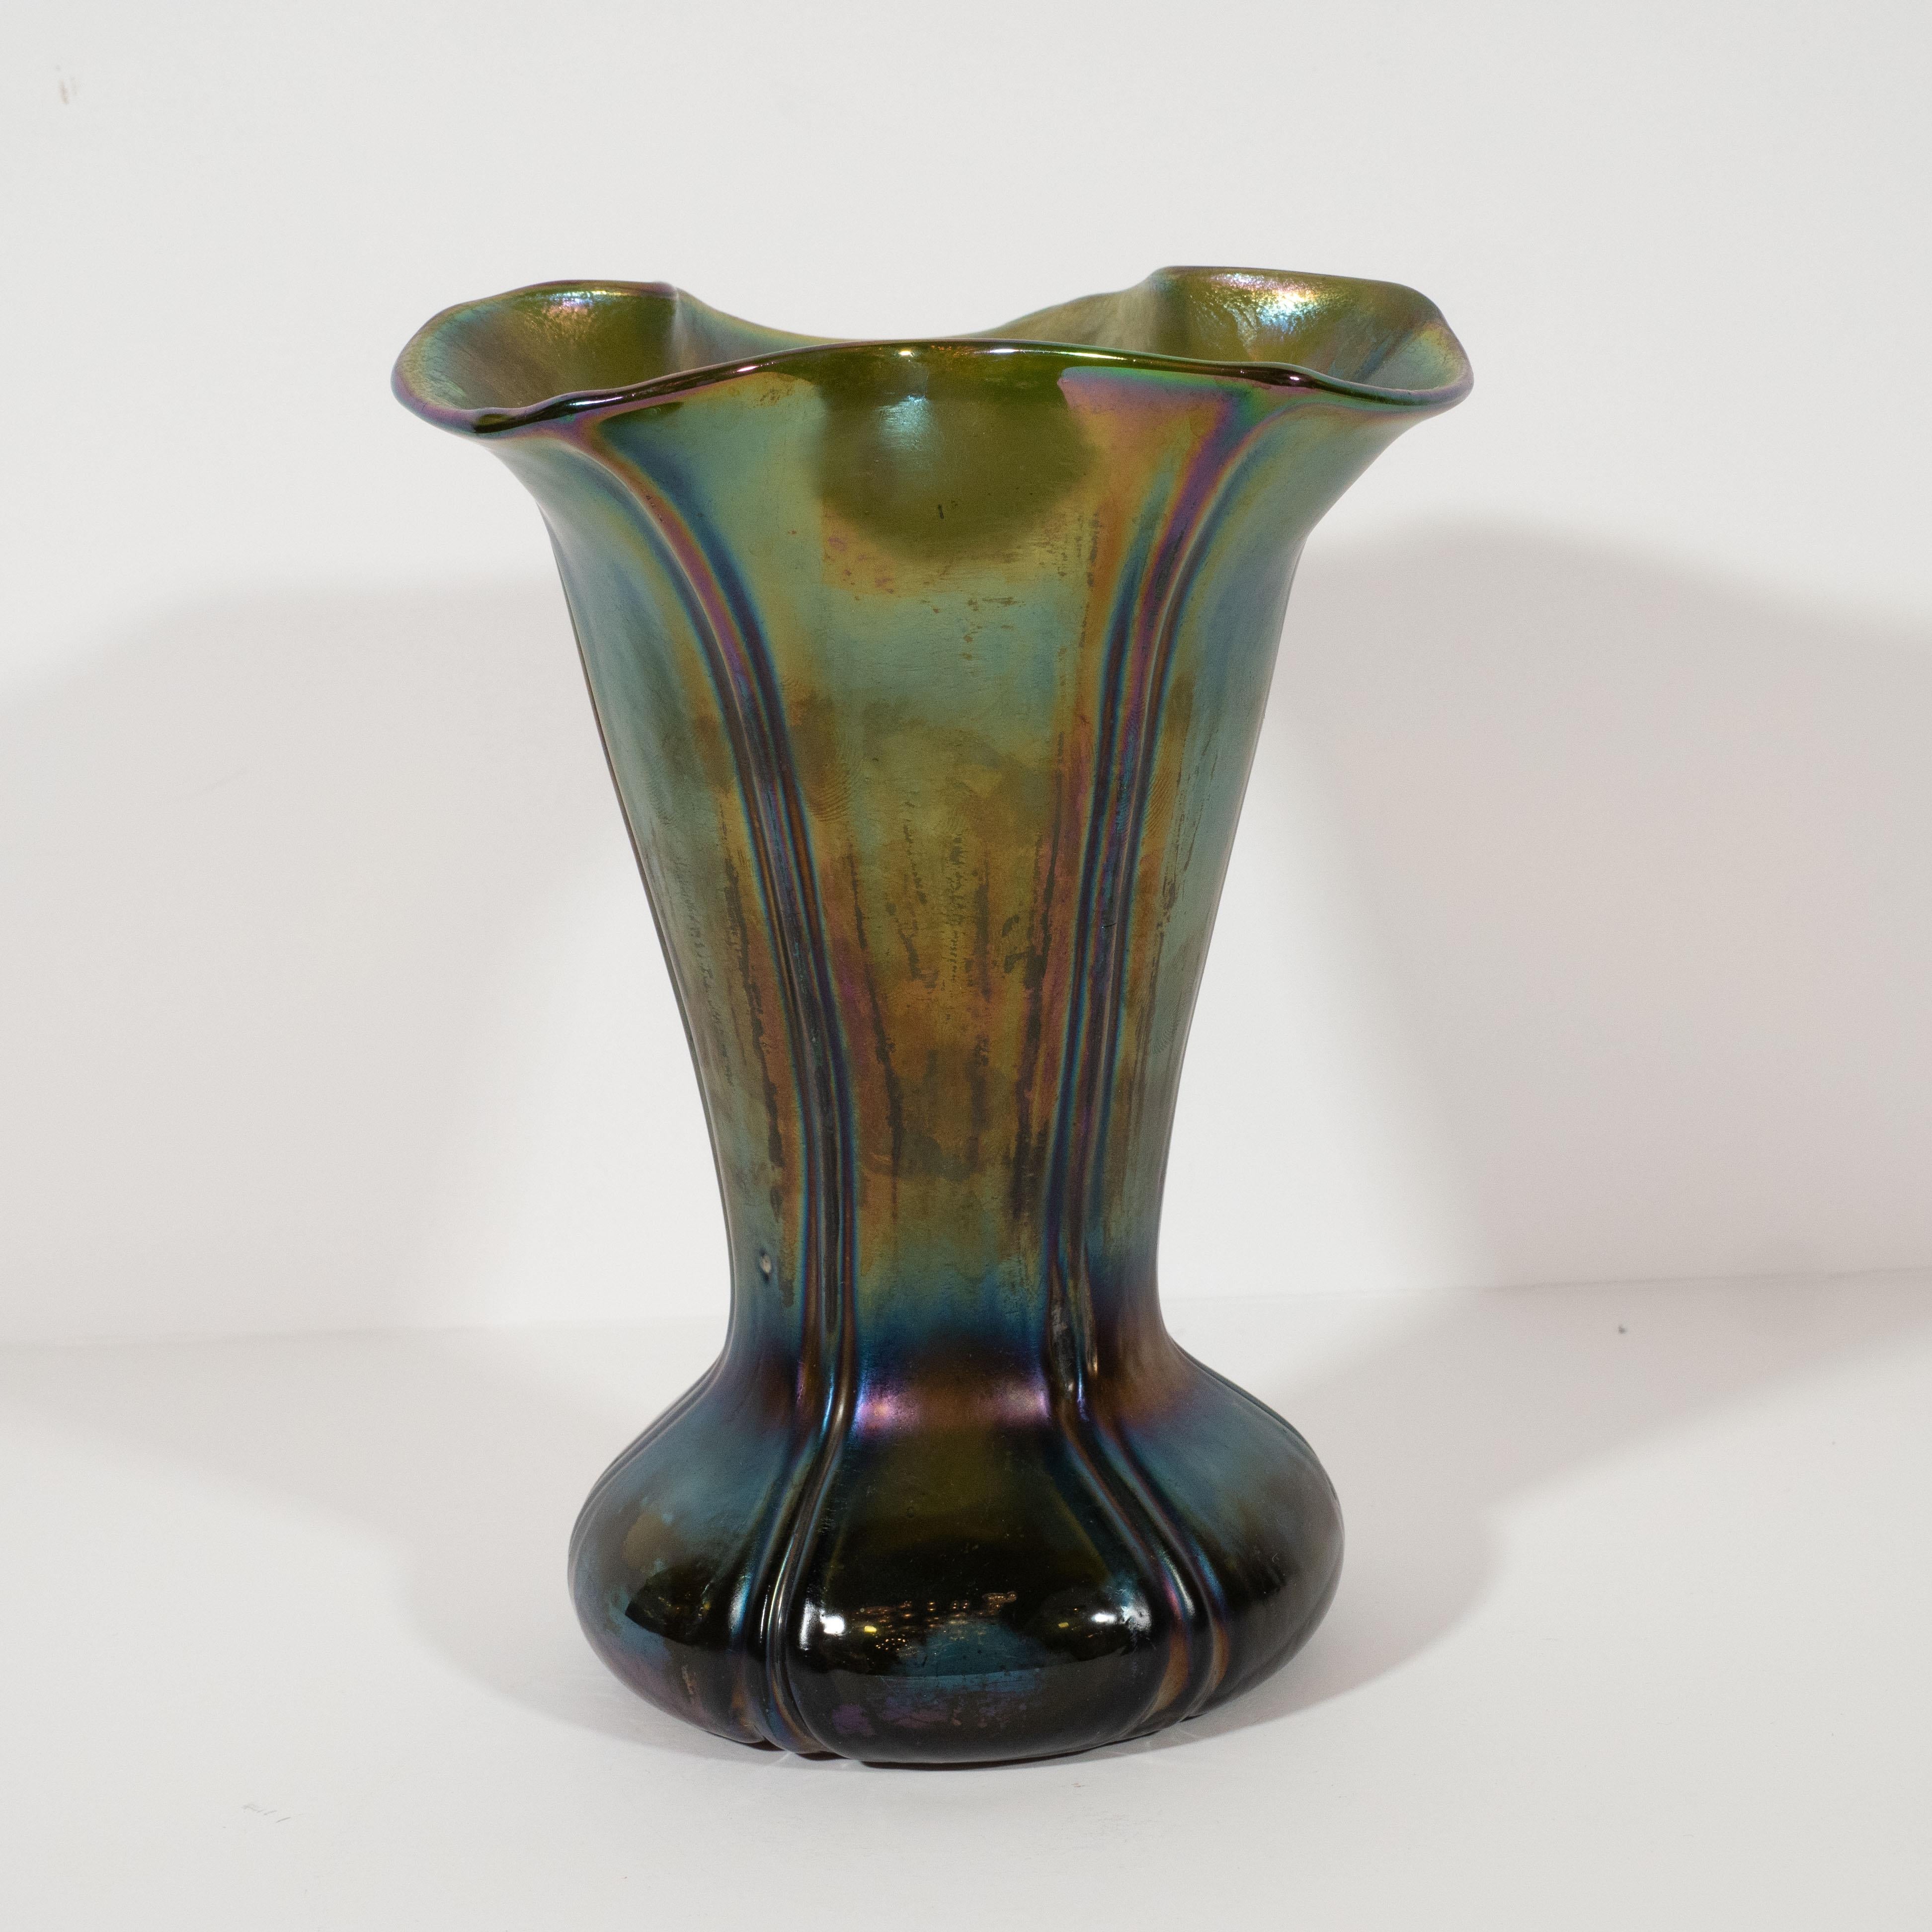 This stunning handblown favrile glass vase was realized in the United States, circa 1970. It features a reeded hourglass form, cinched at its waist, with a sinuously curved mouth. The favrile glass exhibits a beautiful iridescent quality offering